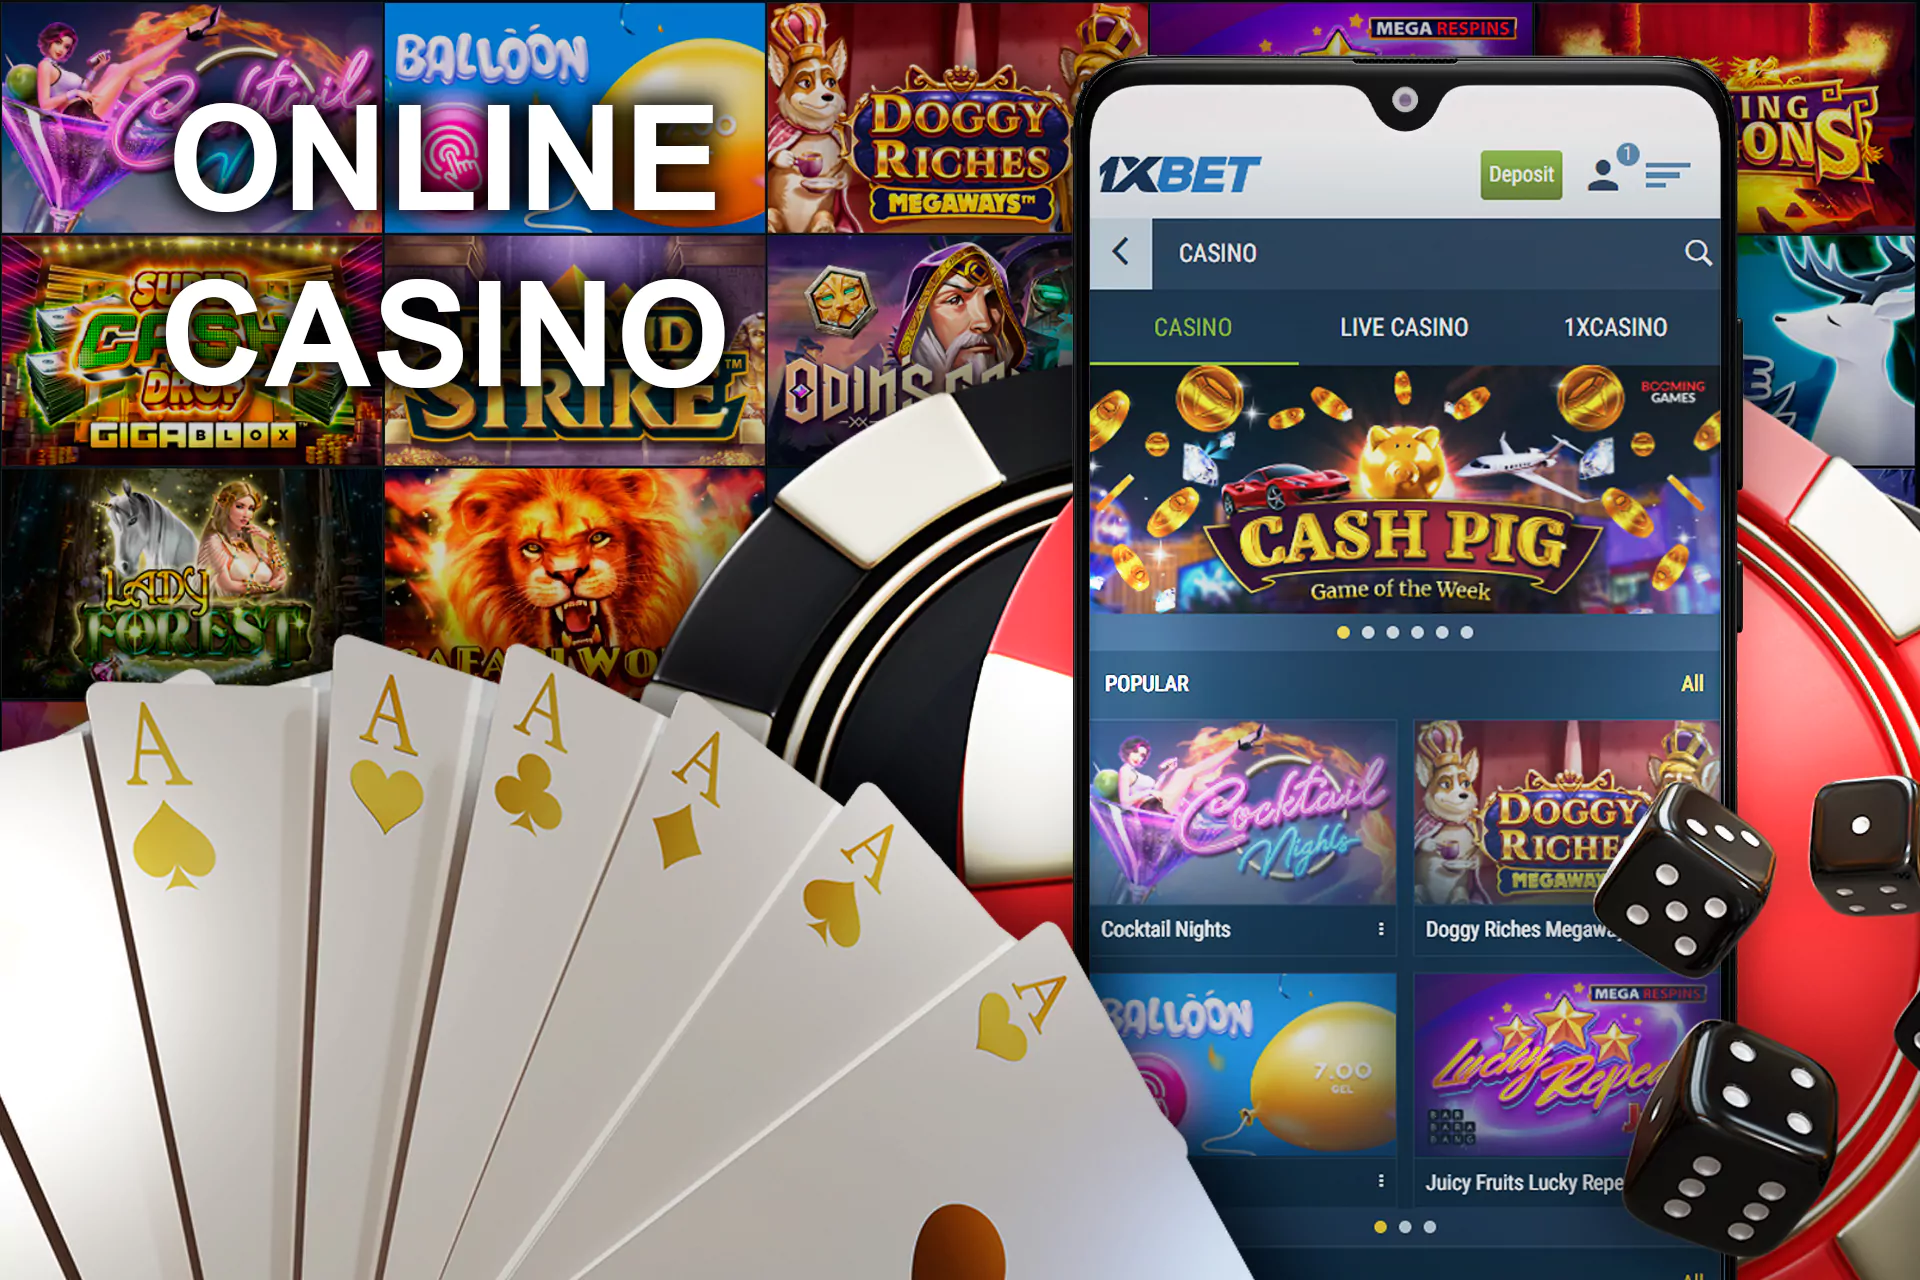 The 1xBet app offers online casino games.